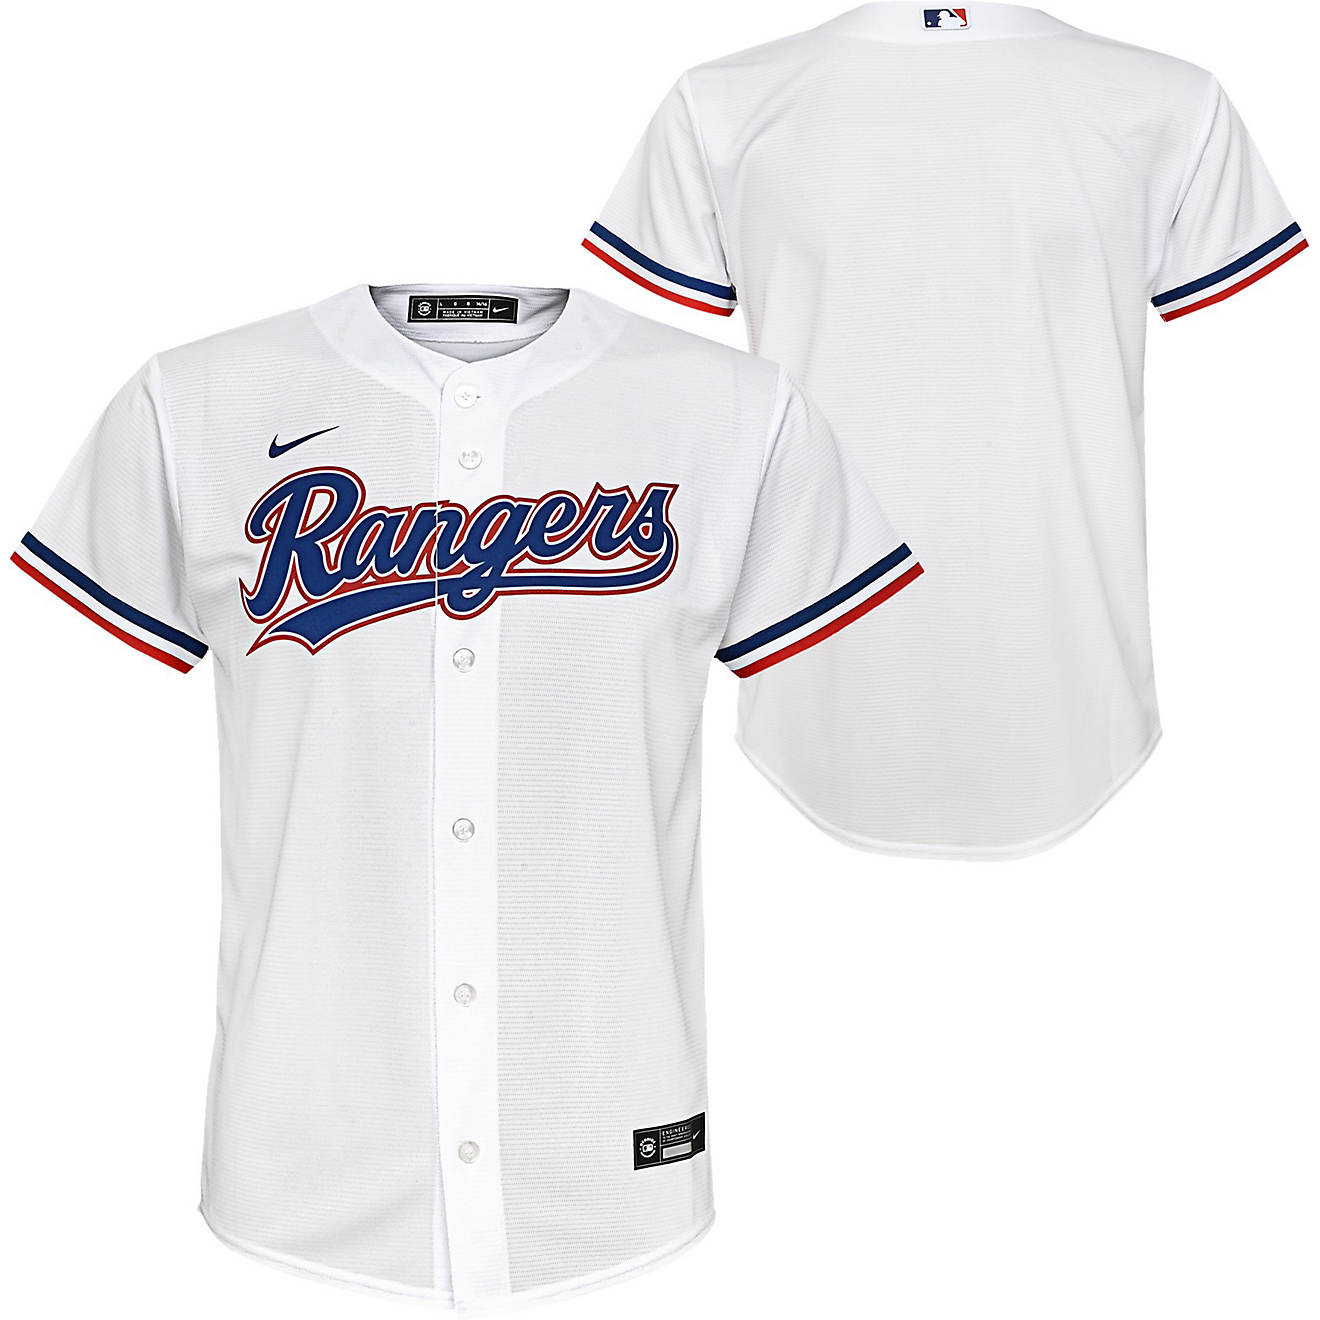 Nike Youth Texas Rangers Home Replica Jersey                                                                                     - view number 1